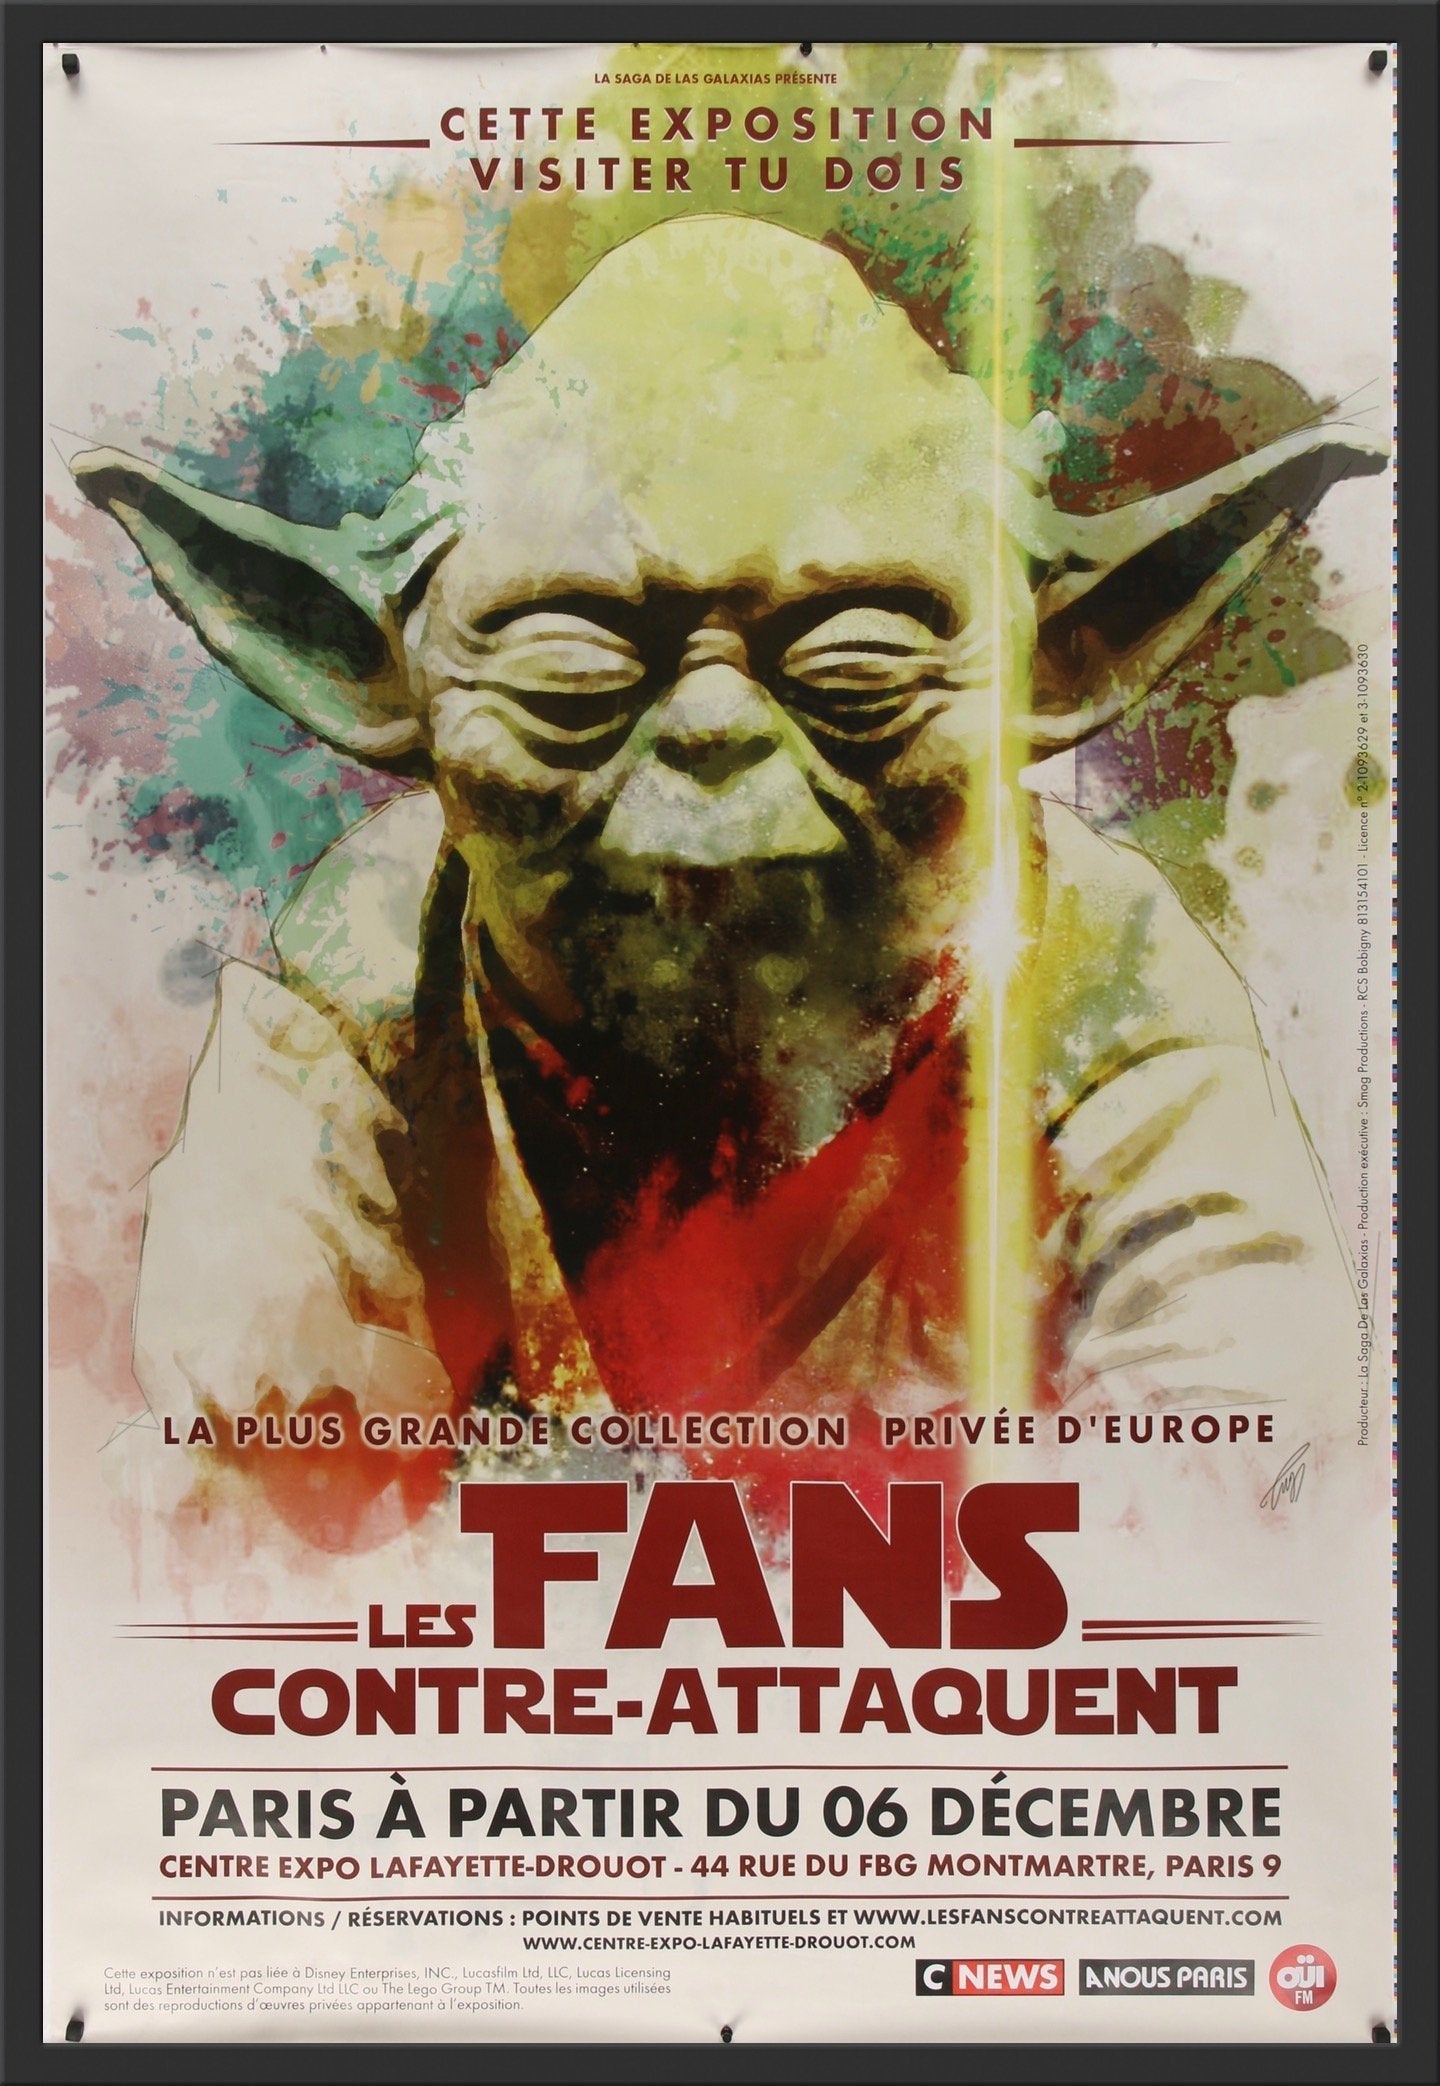 An original poster for the Star Wars Exhibition Les Fans Contre-Attaquent / The Fans Counter Attack / The Fans Strikes Back